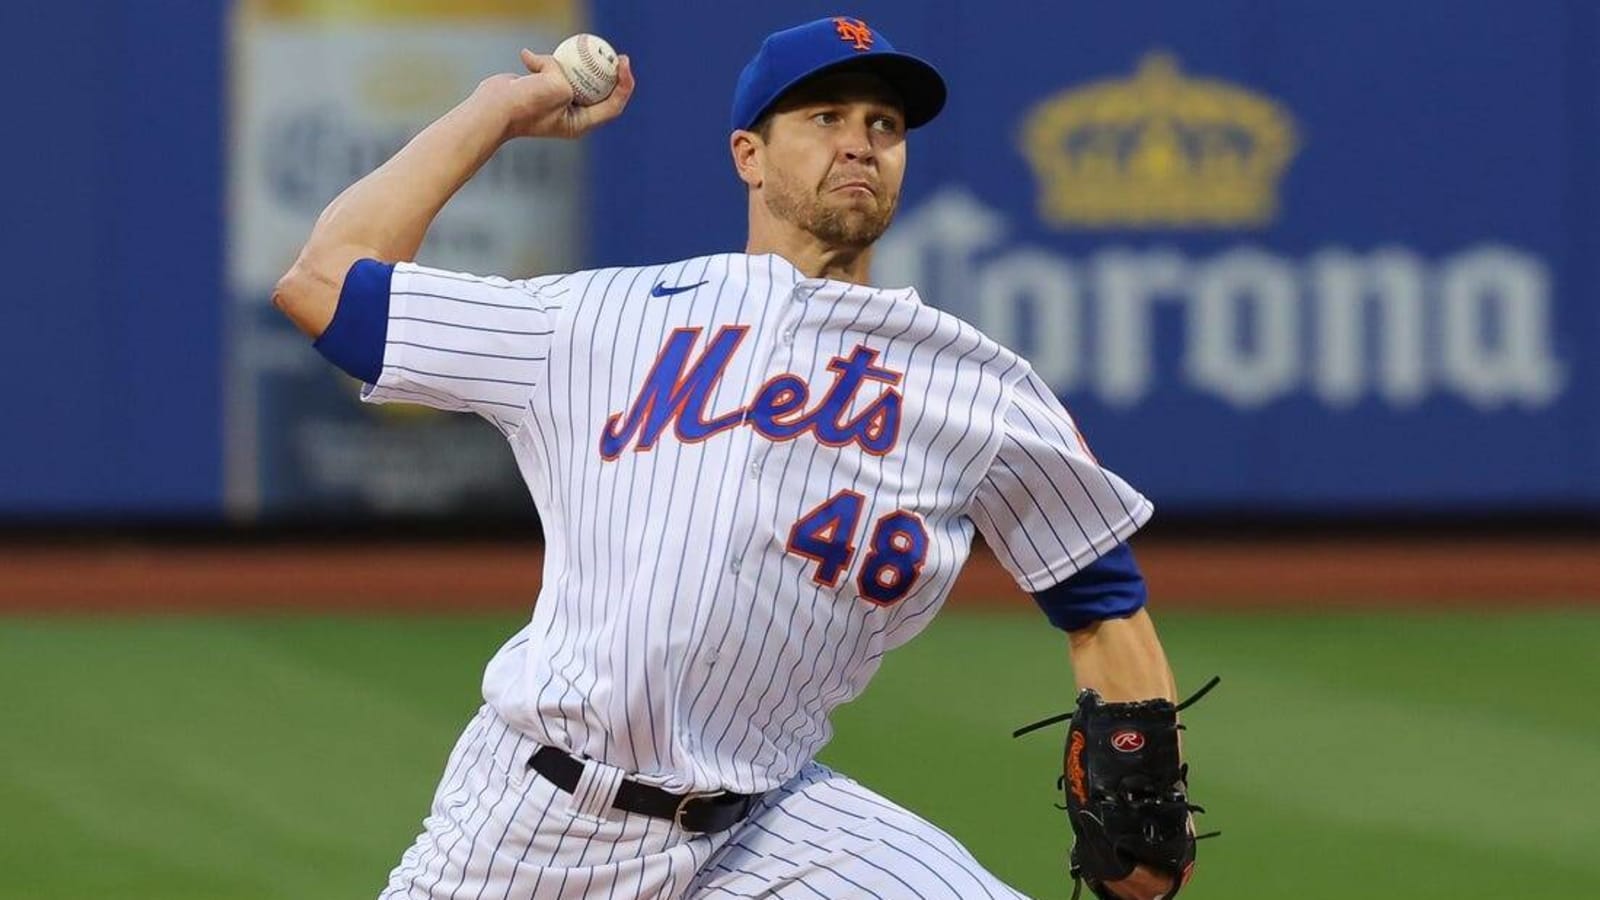 Los Angeles Dodgers vs. New York Mets prediction and odds Wed. 8/31: Mets and deGrom try to even series with L.A.